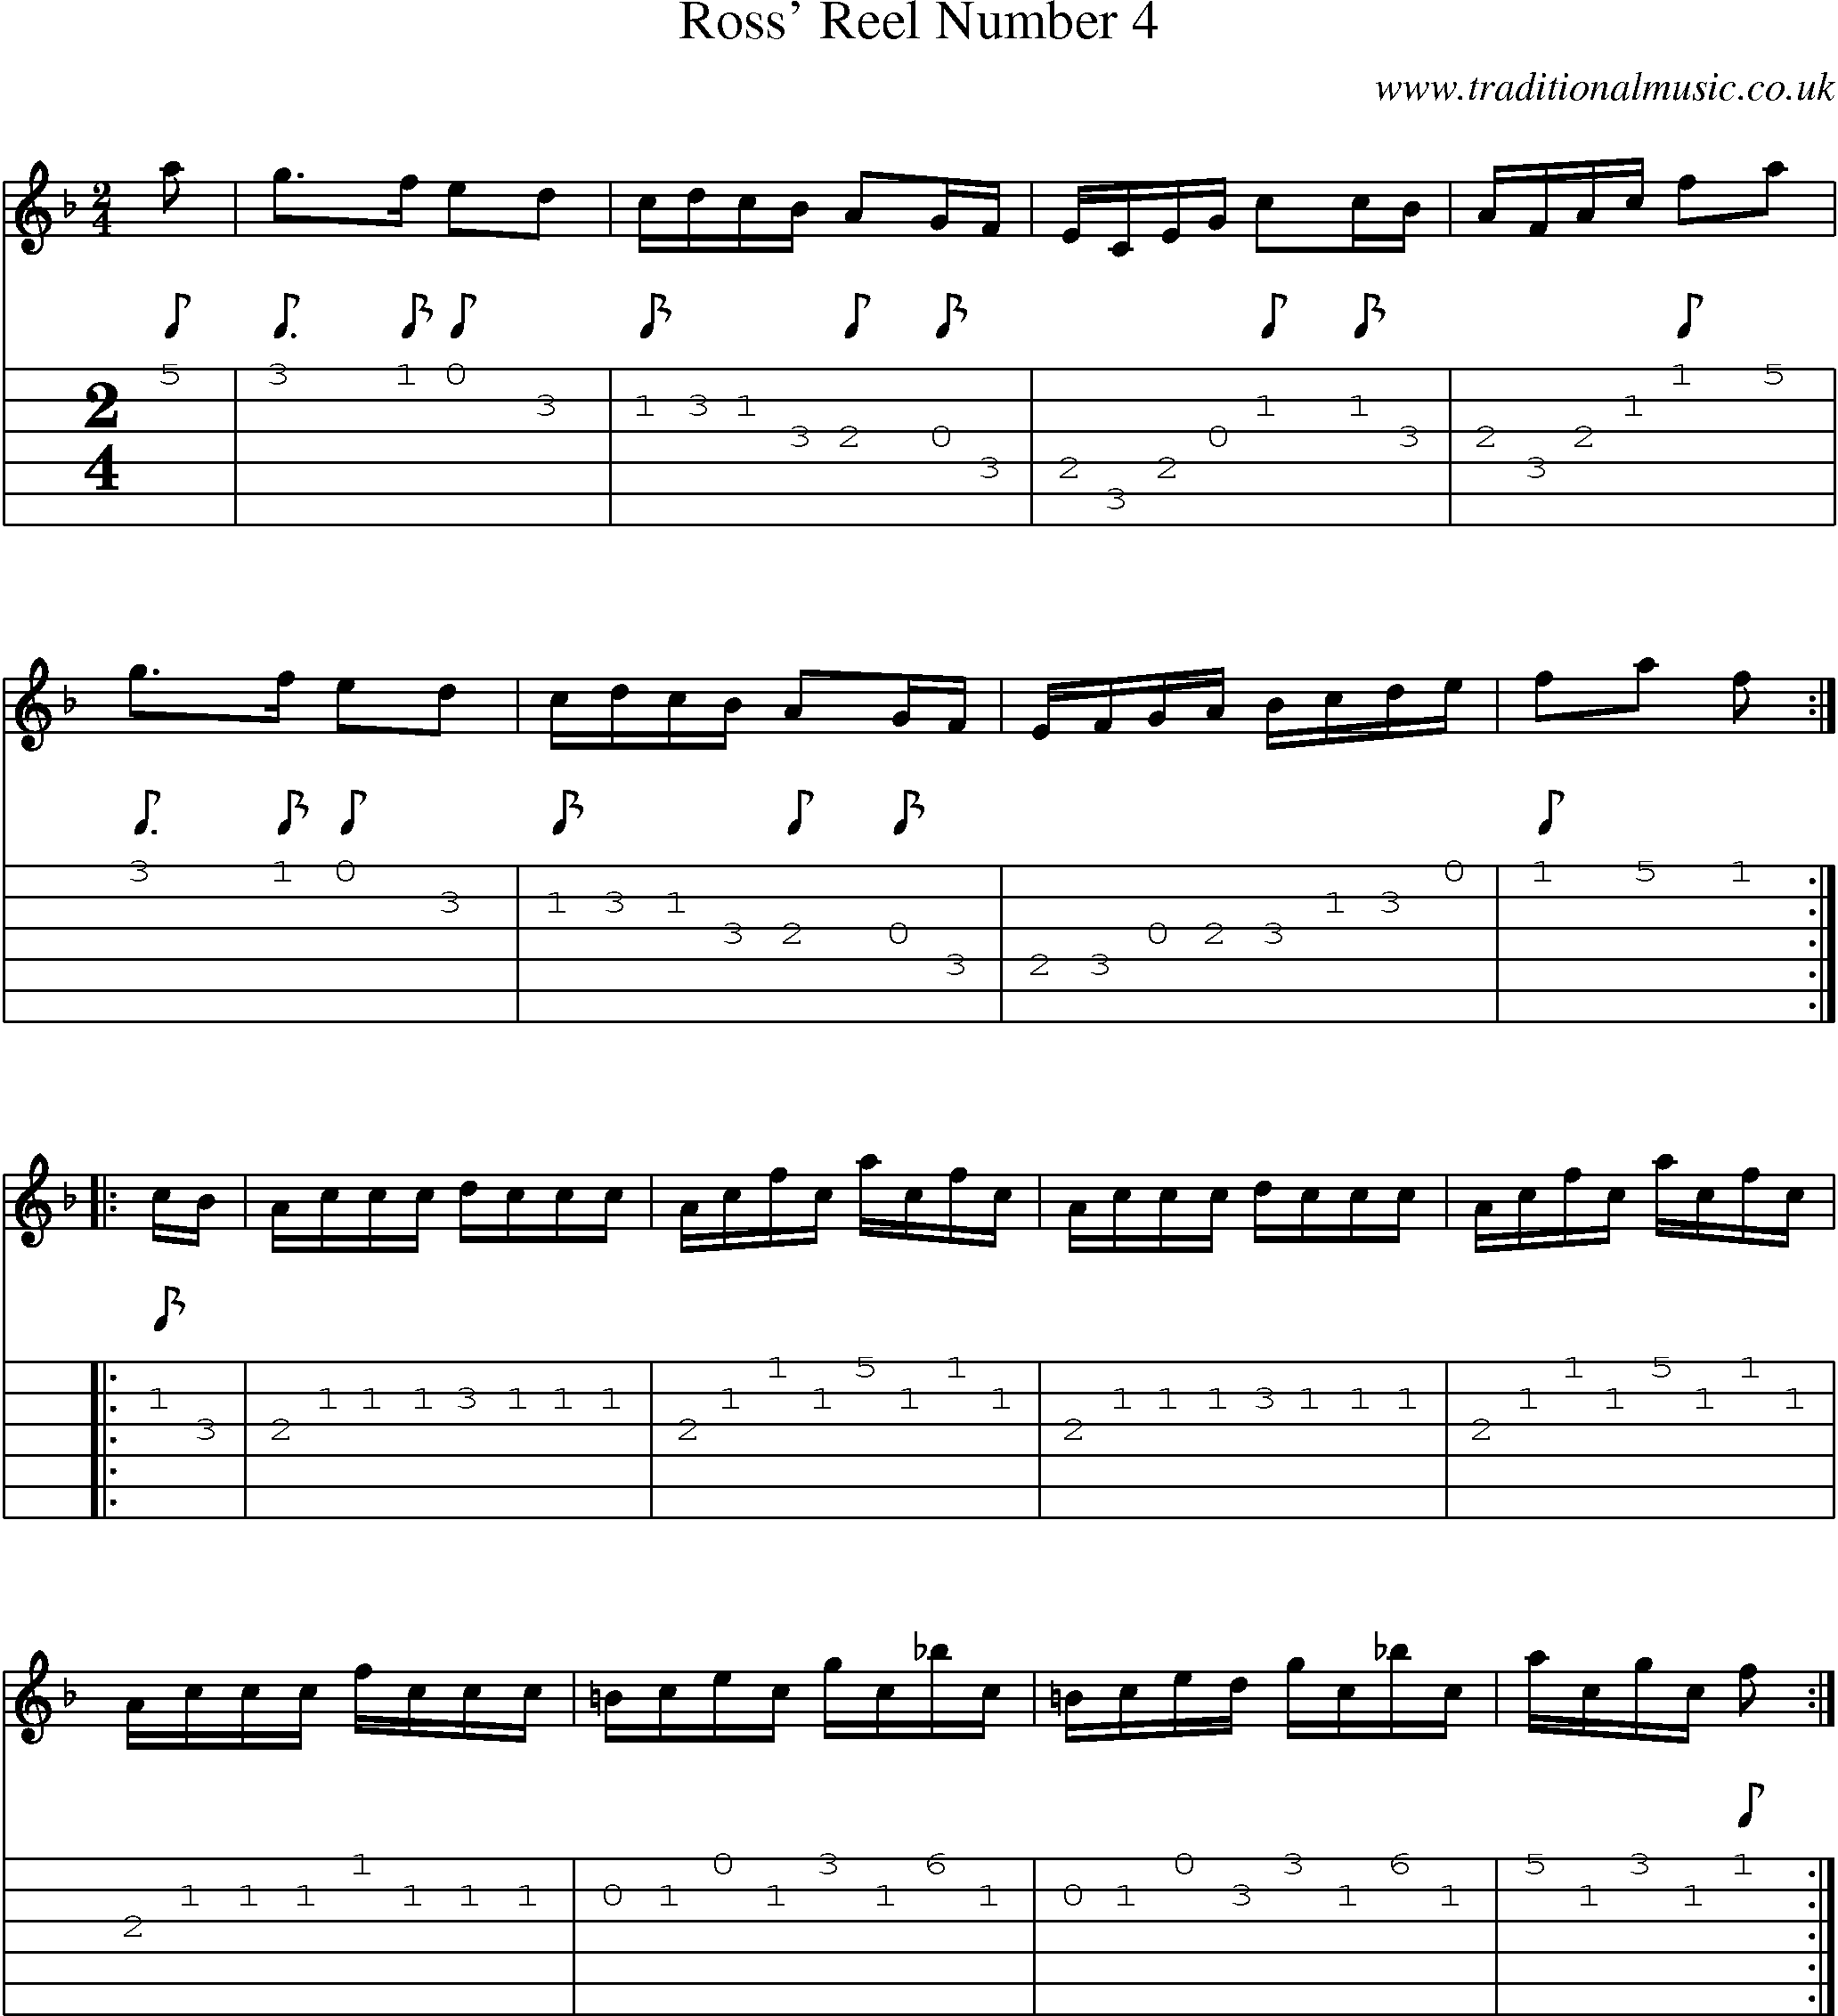 Music Score and Guitar Tabs for Ross Reel Number 4